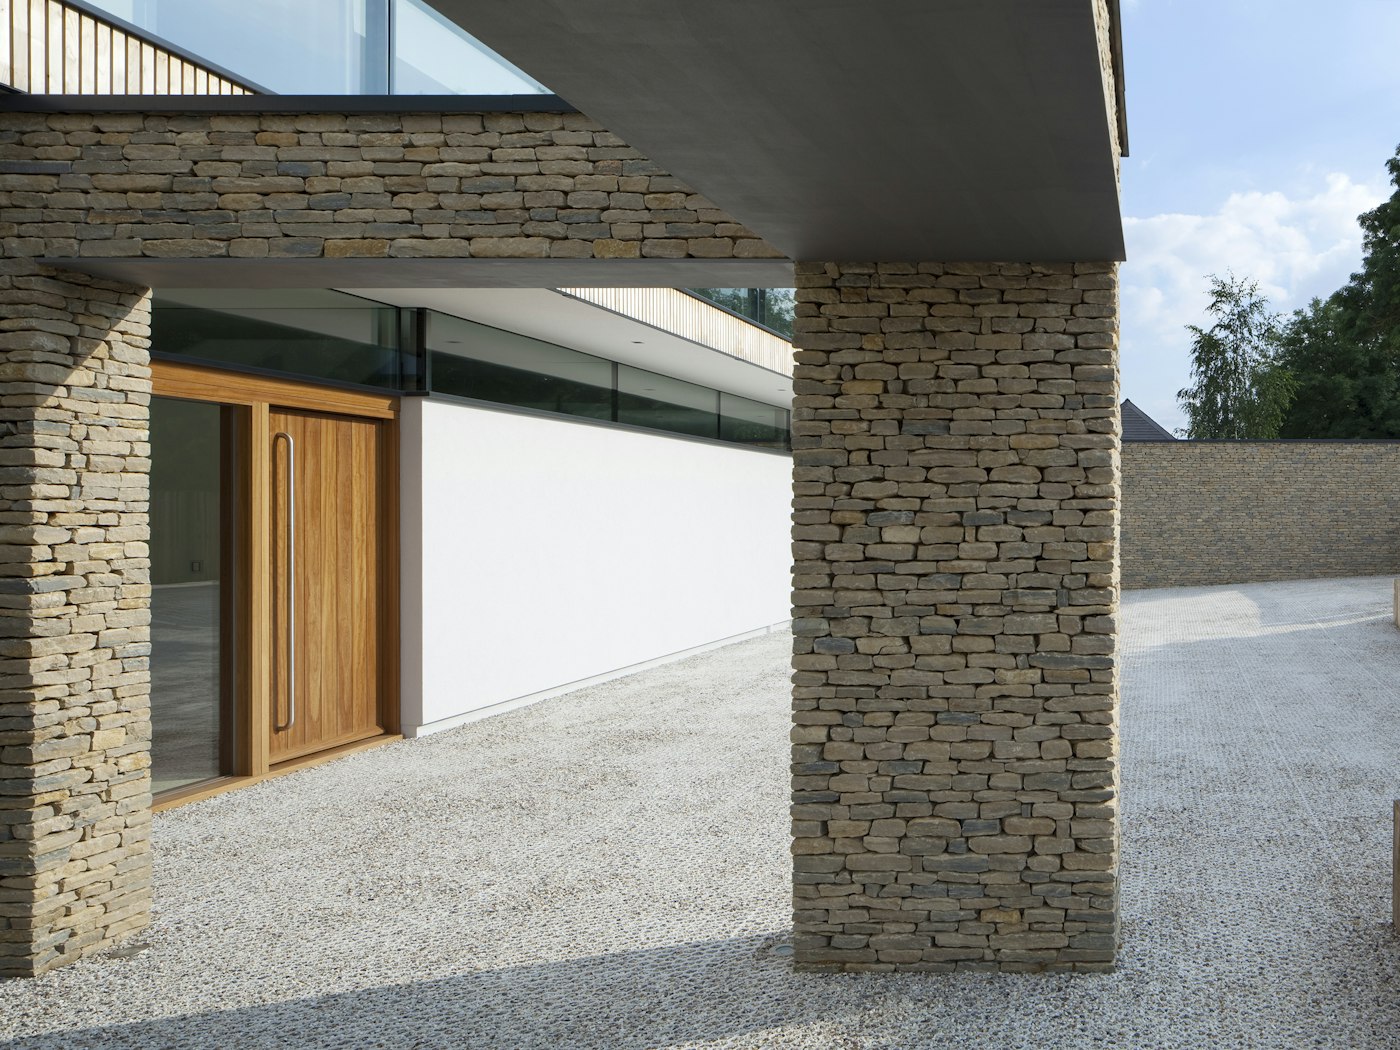 The iroko front door blends well with the different building materials